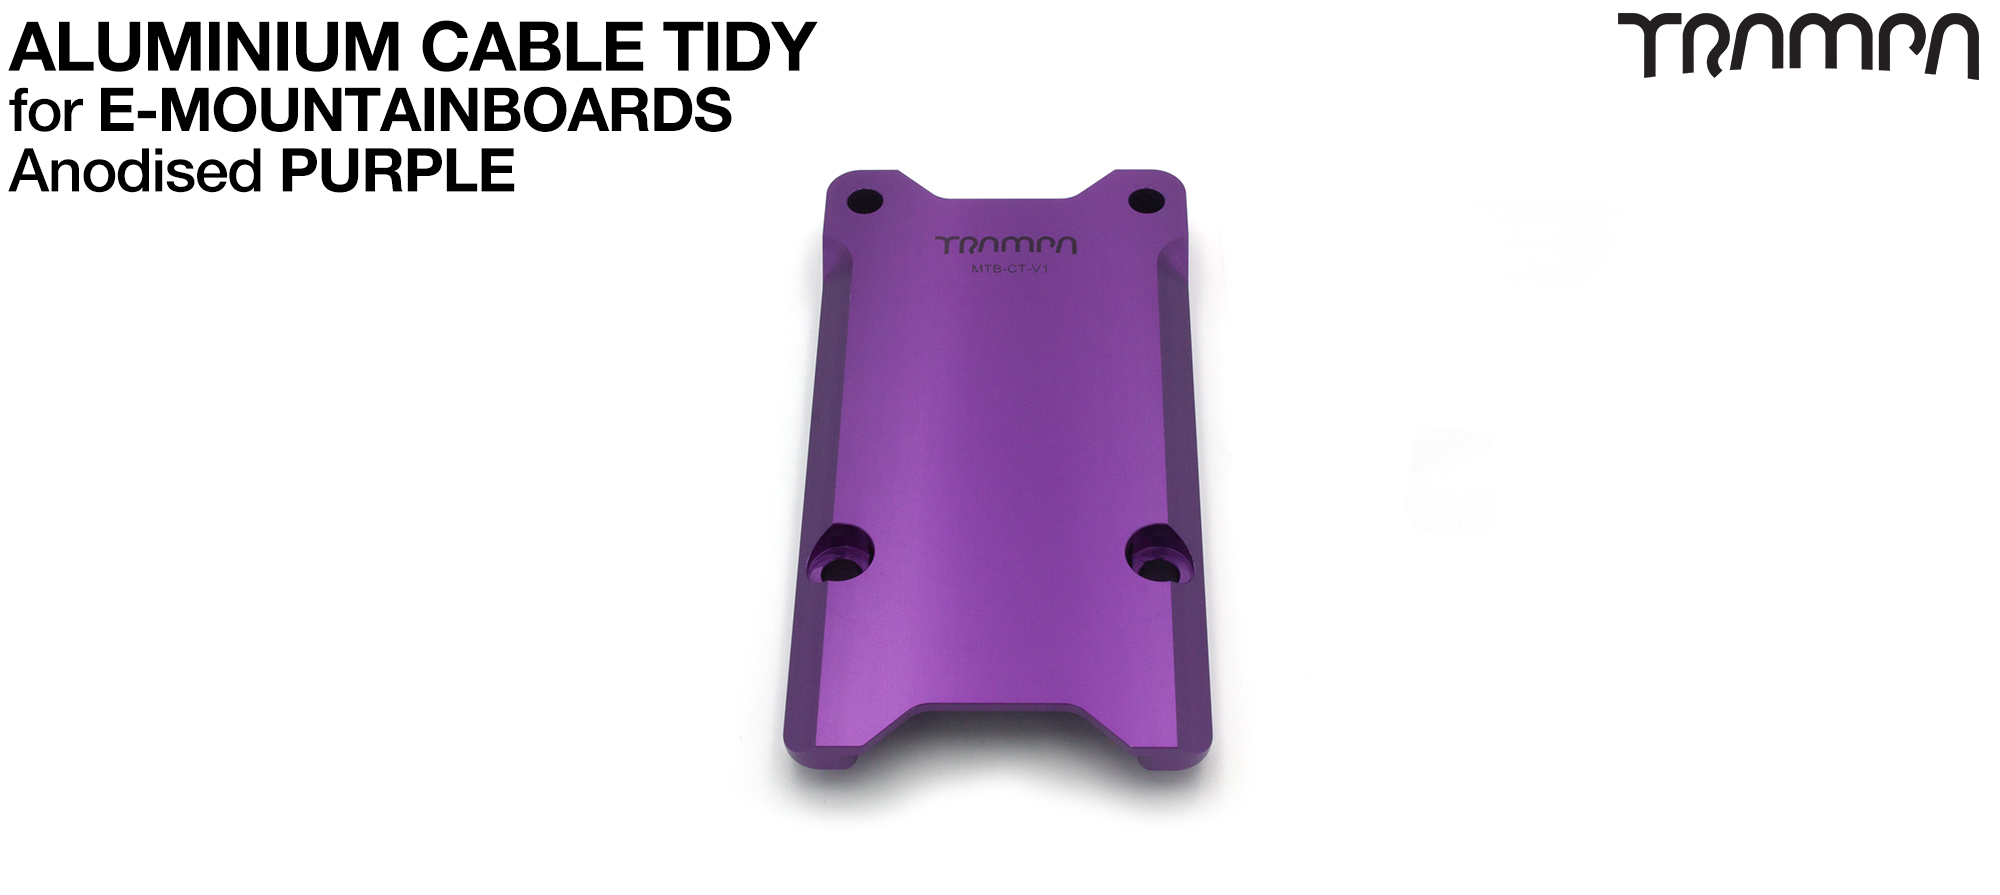 REAR CABLE Router Anodised - PURPLE 